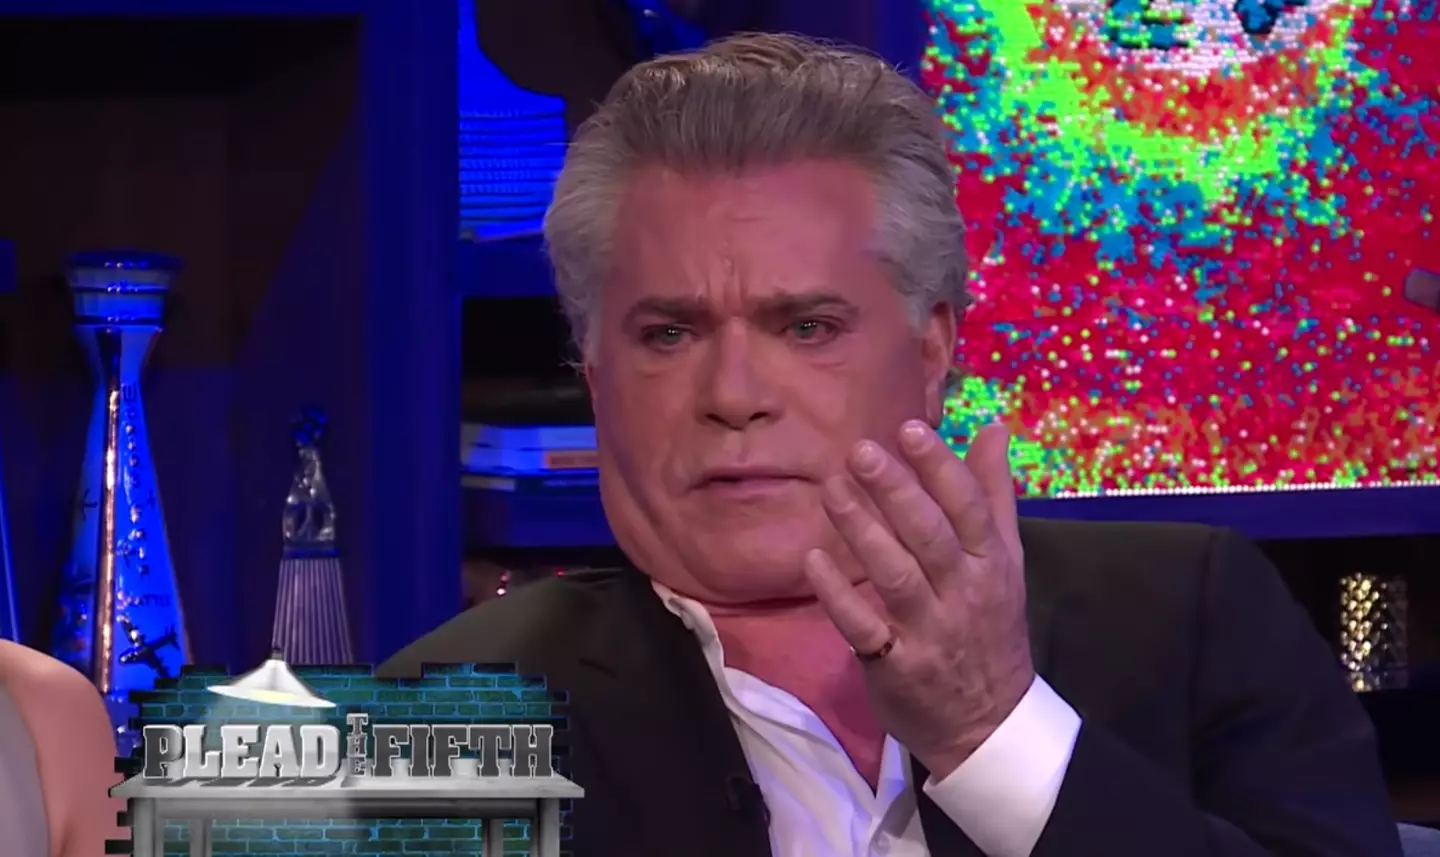 Liotta gave a hilariously nonchalant response.